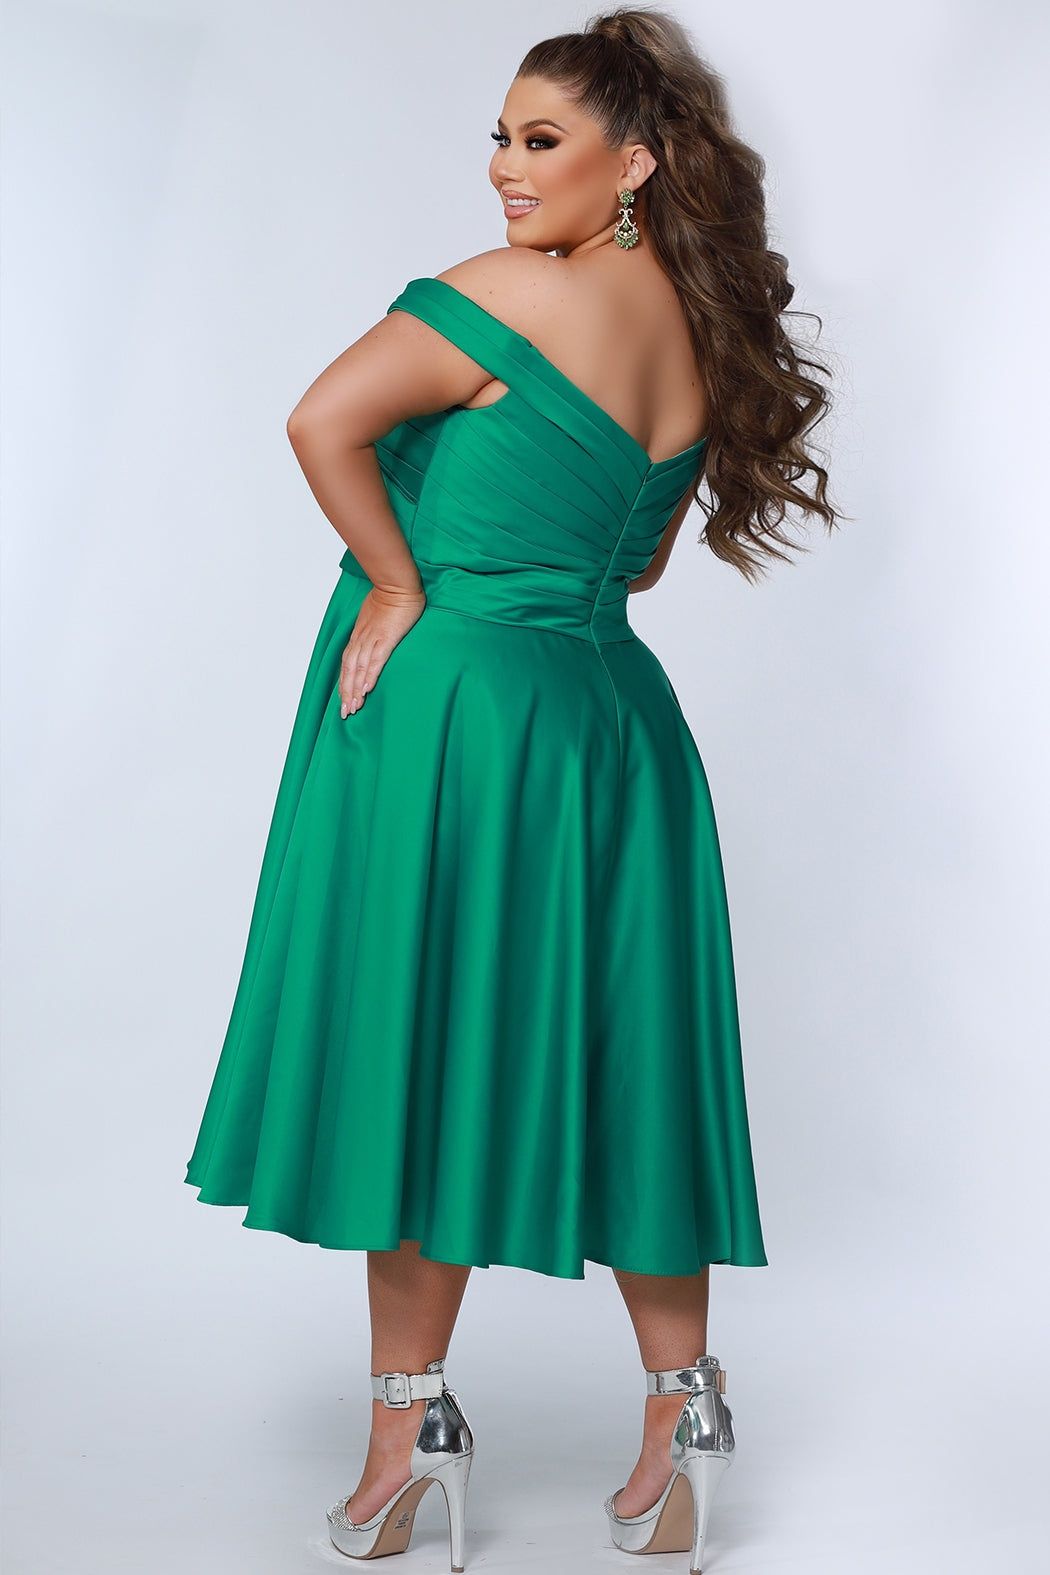 Style CE2301 Sydney's Closet Size 14 Satin Emerald Green Cocktail Dress on Queenly